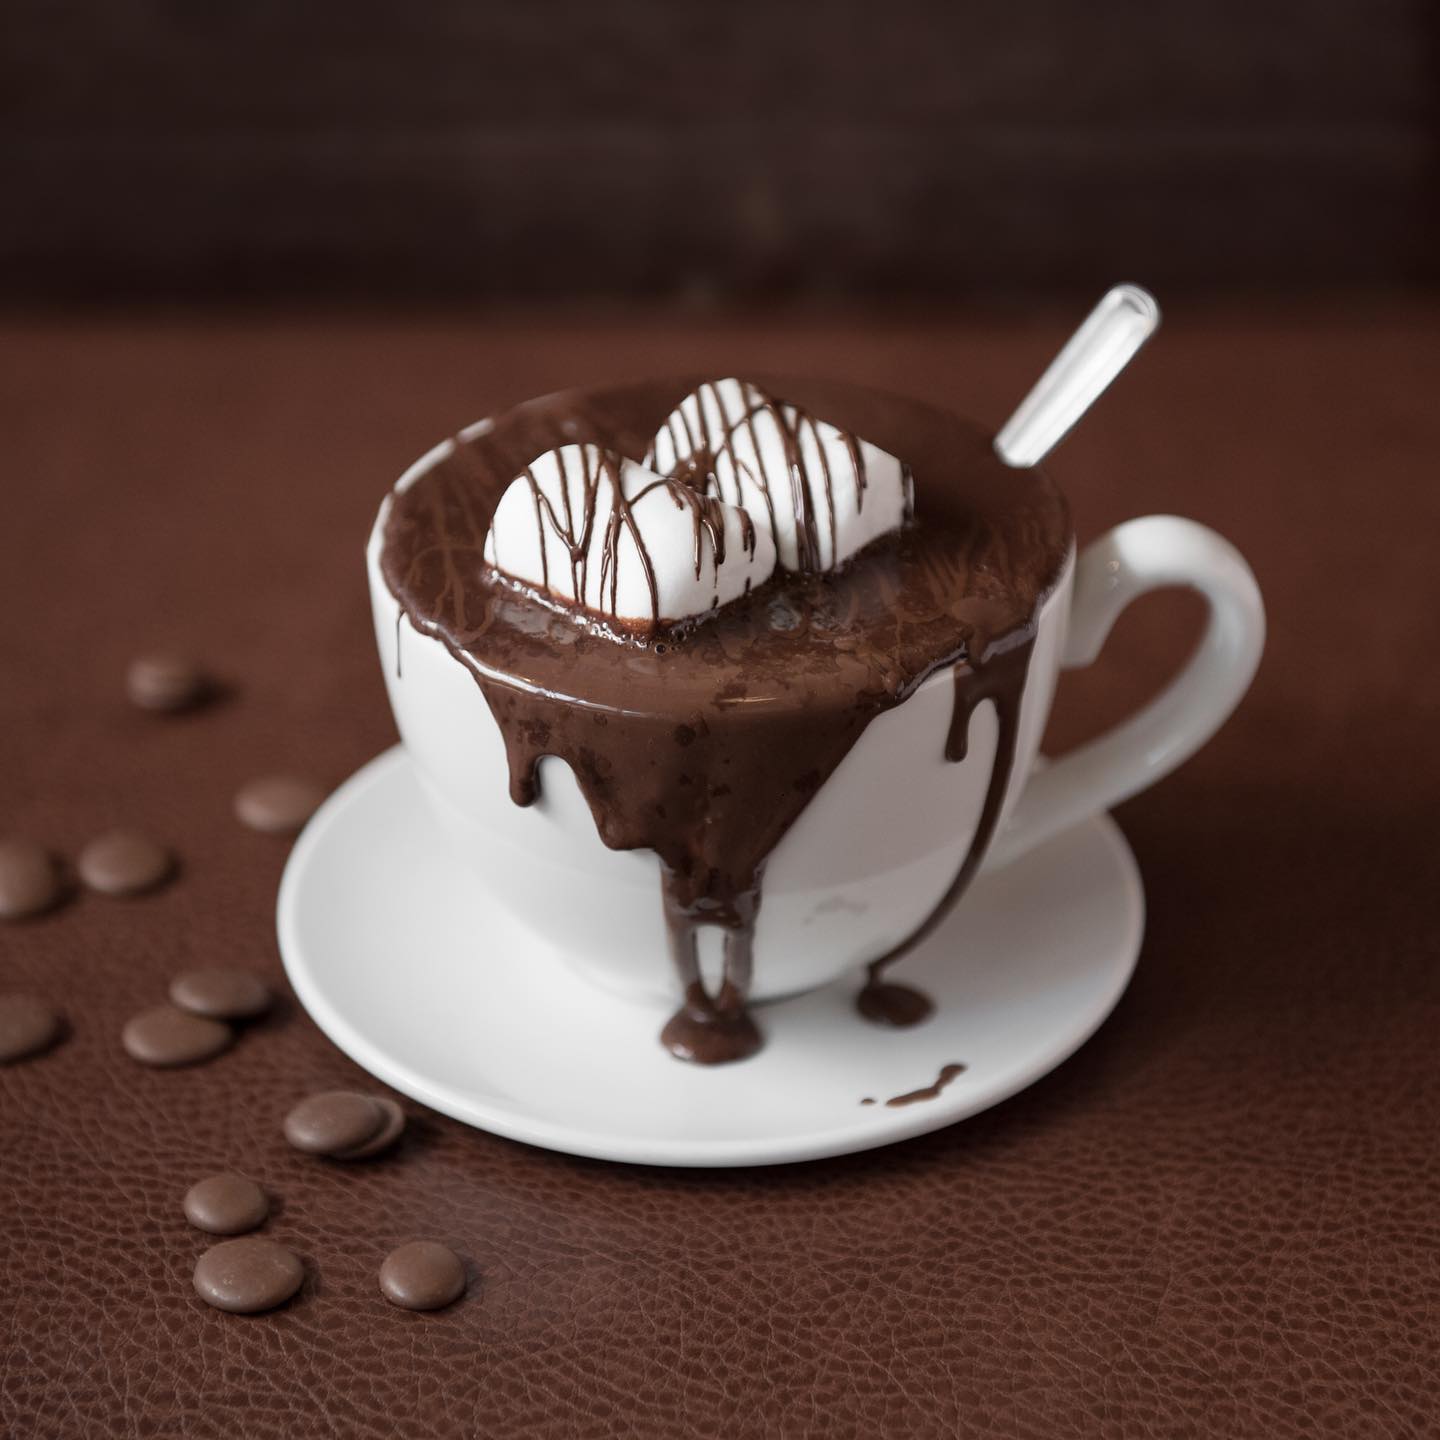 A cup of hot chocolate with chocolate oozing over the edge.